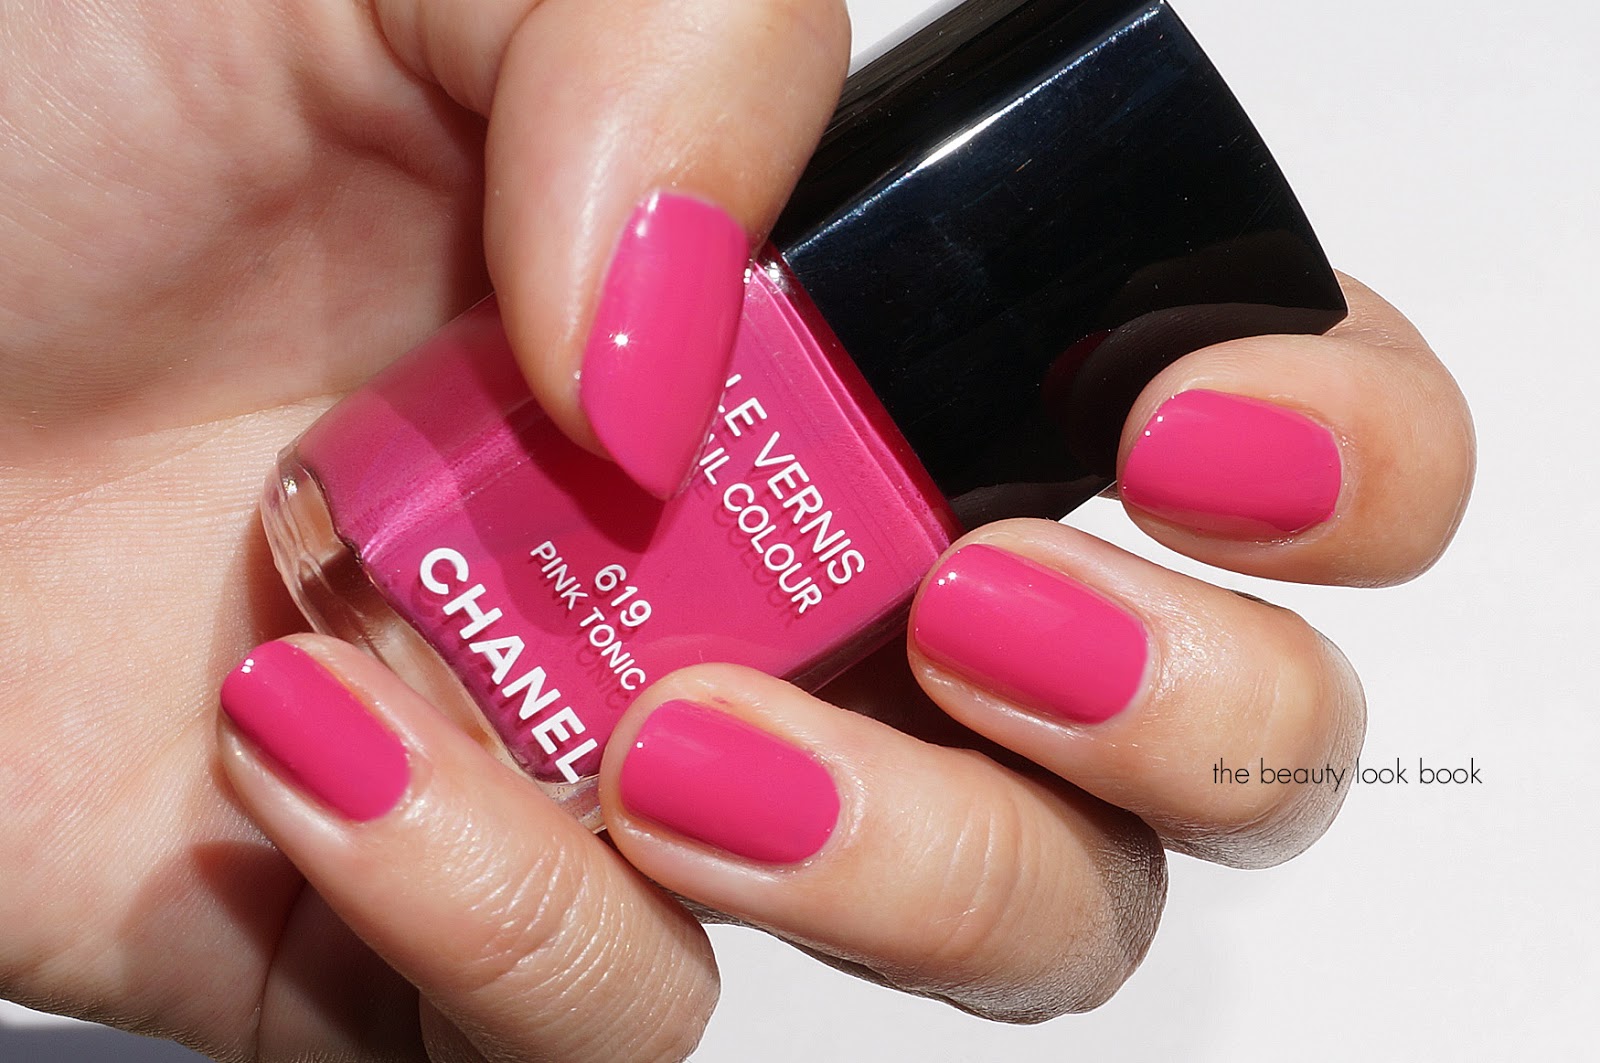 Chanel Pink Tonic 619 Le Vernis - The Beauty Look Book